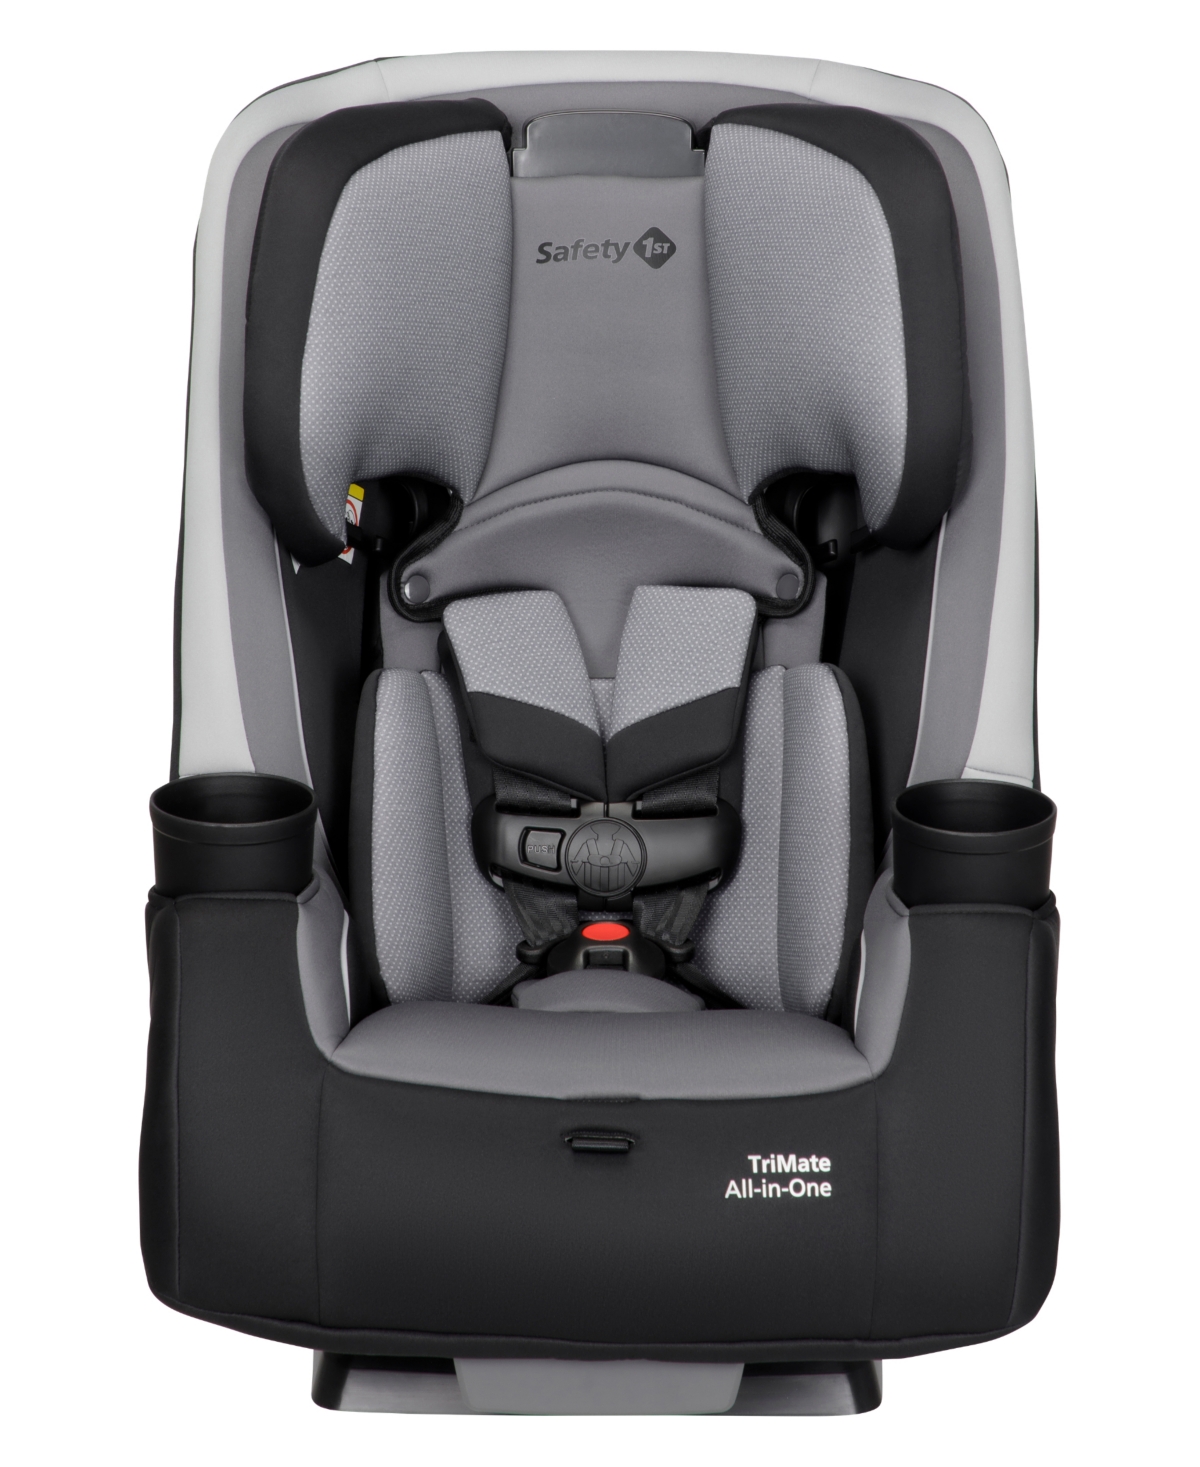 Safety 1st Baby Trimate All-in-one Convertible Car Seat In High Street